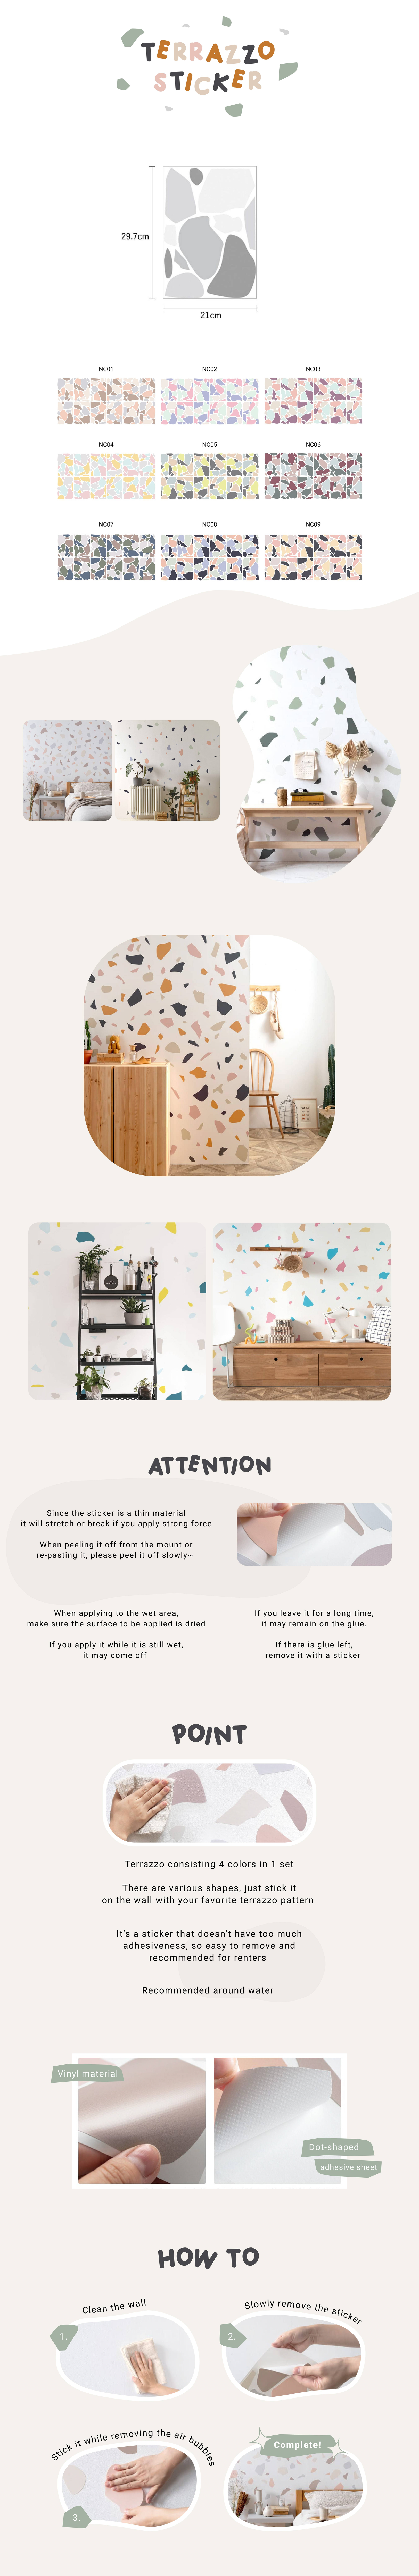 Terrazzo-inspired Wall Decal Stickers in Singapore